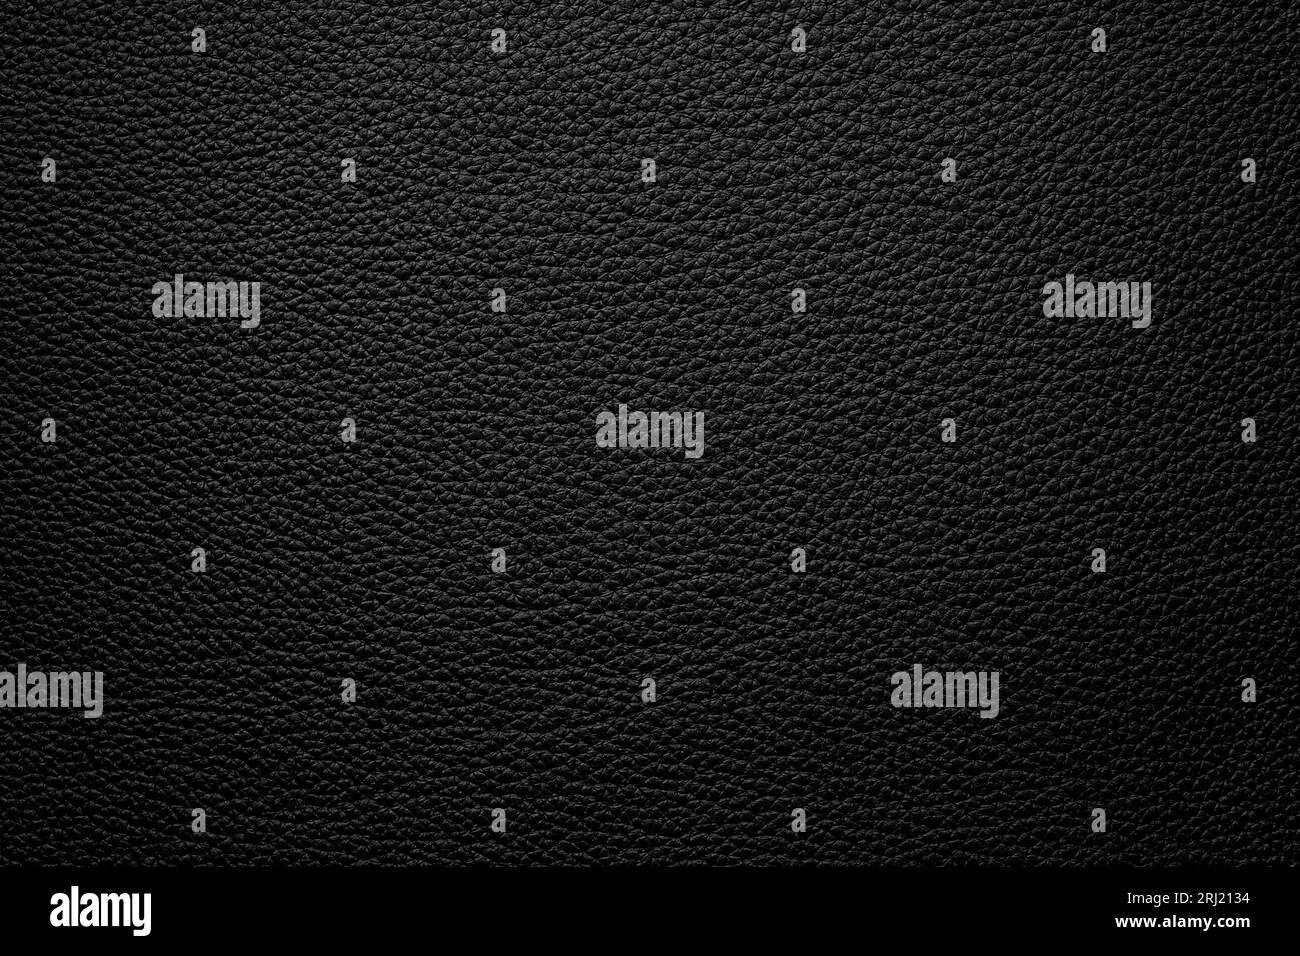 black leather background, natural hide texture closeup Stock Photo